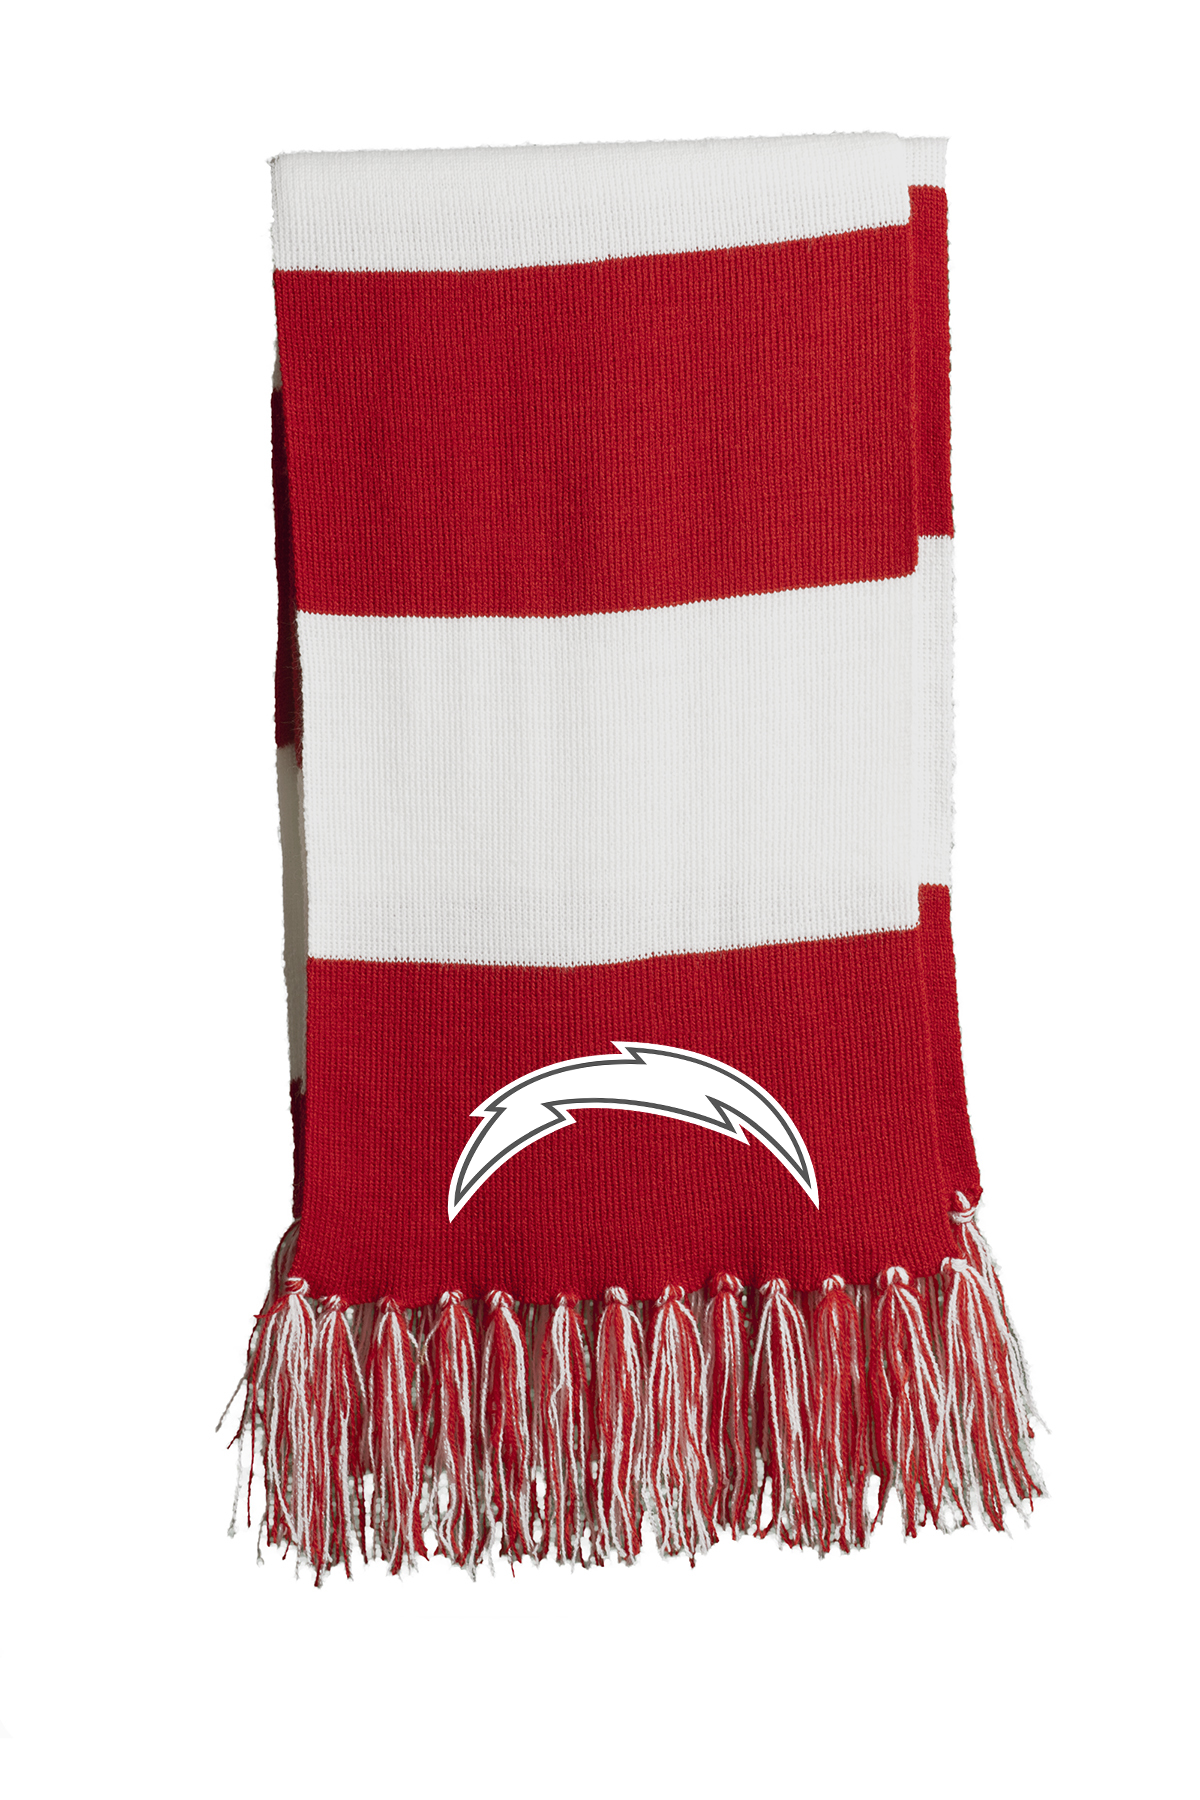 Connetquot Football Team Scarf